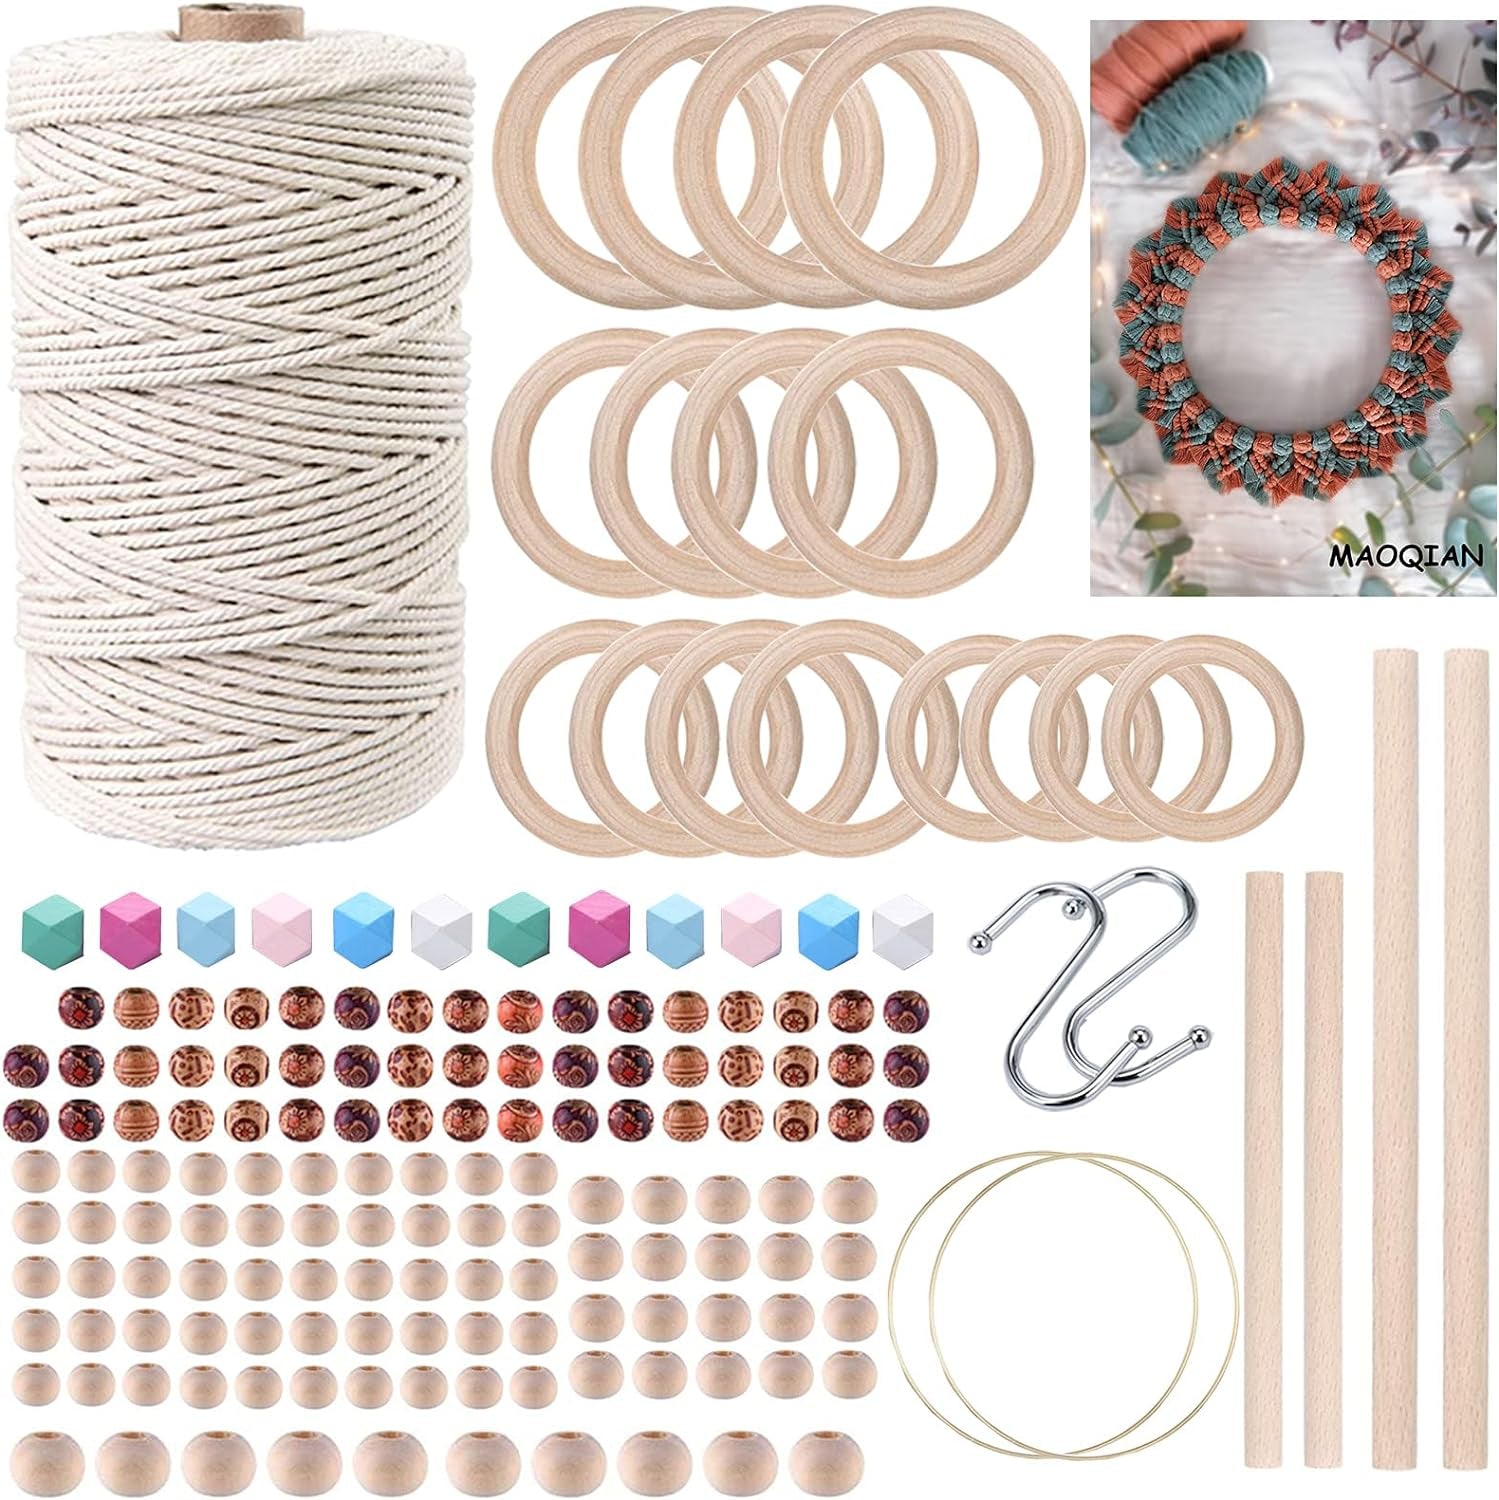 120Pcs Macrame Kits for Beginners 3Mm X 109Yards Natural Cotton Macrame Cord with Wooden Beads & Rings,Wooden Sticks,Metal Rings Macrame Supplies Best for Macrame Plant Hanger